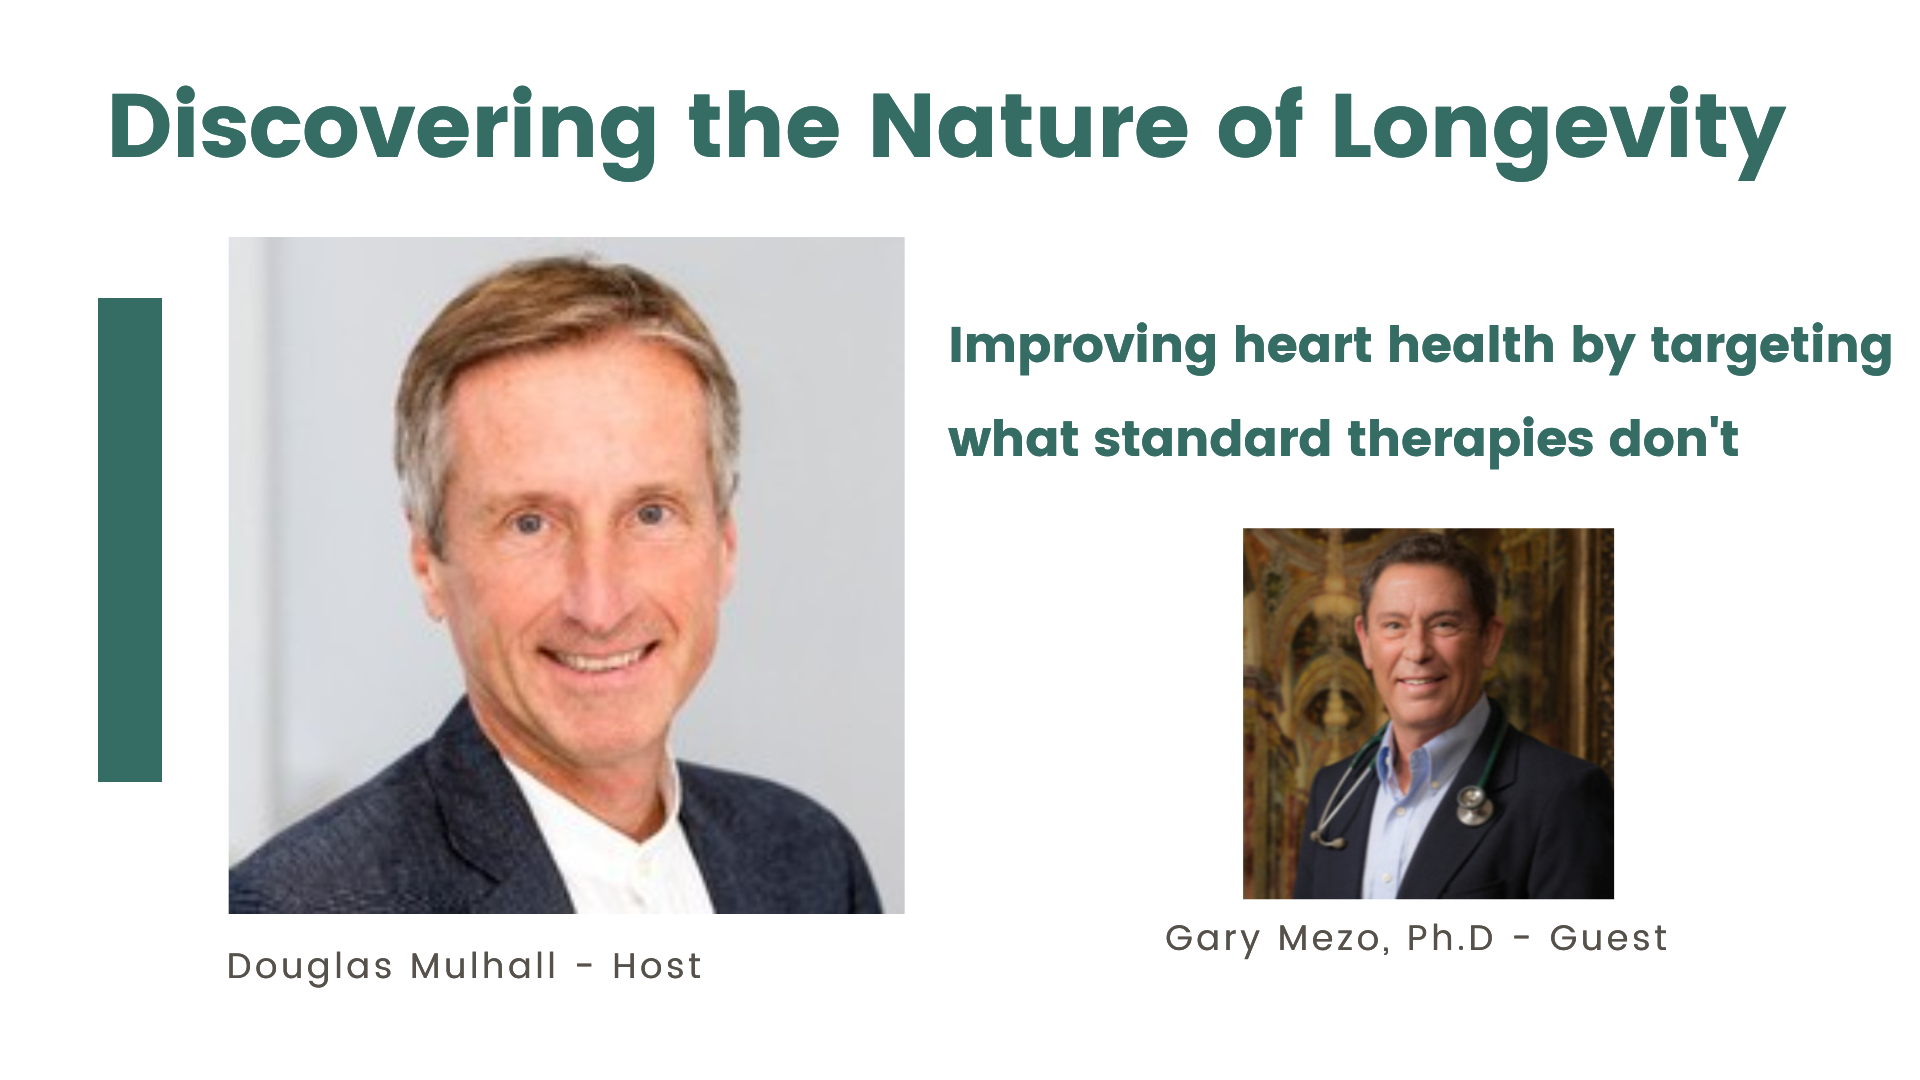 Improving Hearth Health by targeting what standard therapies don't